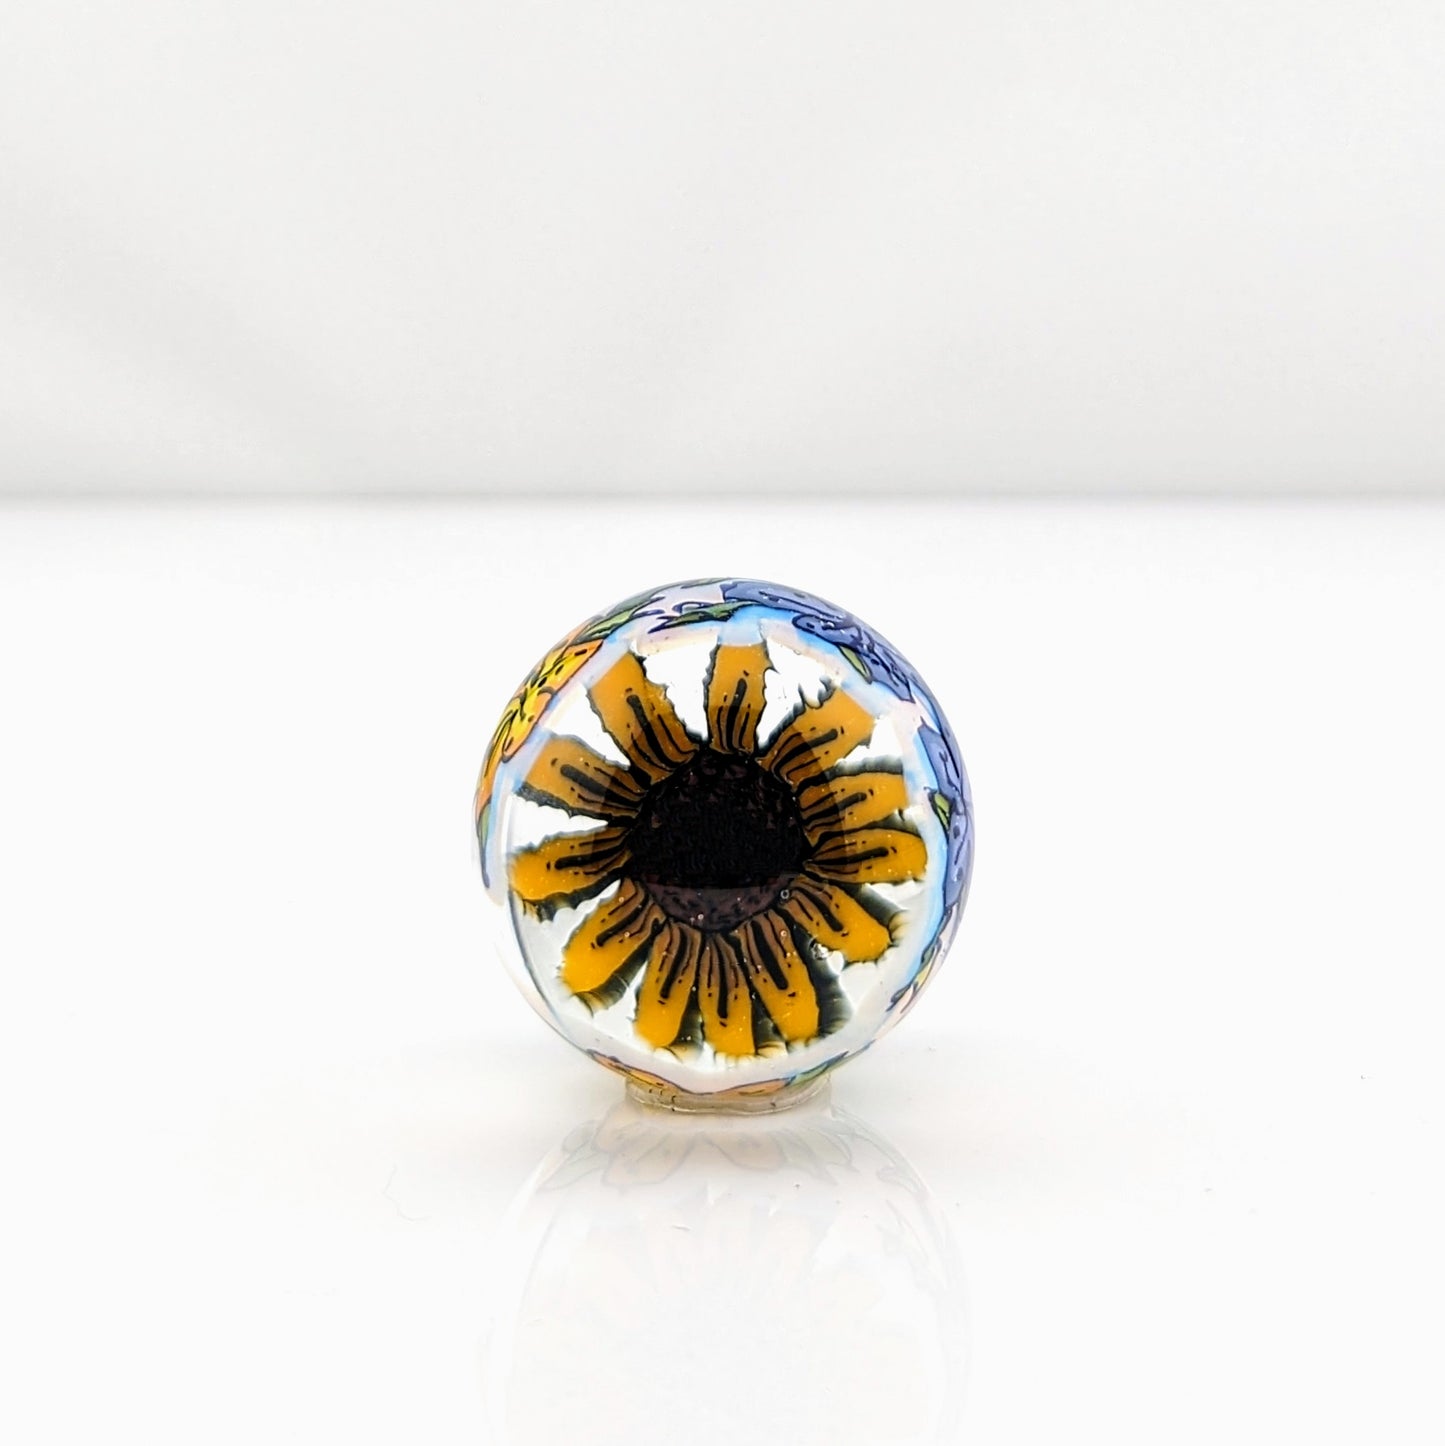 BMFT 2024 Borosilicate Glass Marble 41 mm  Hand blown glass made by BMFT